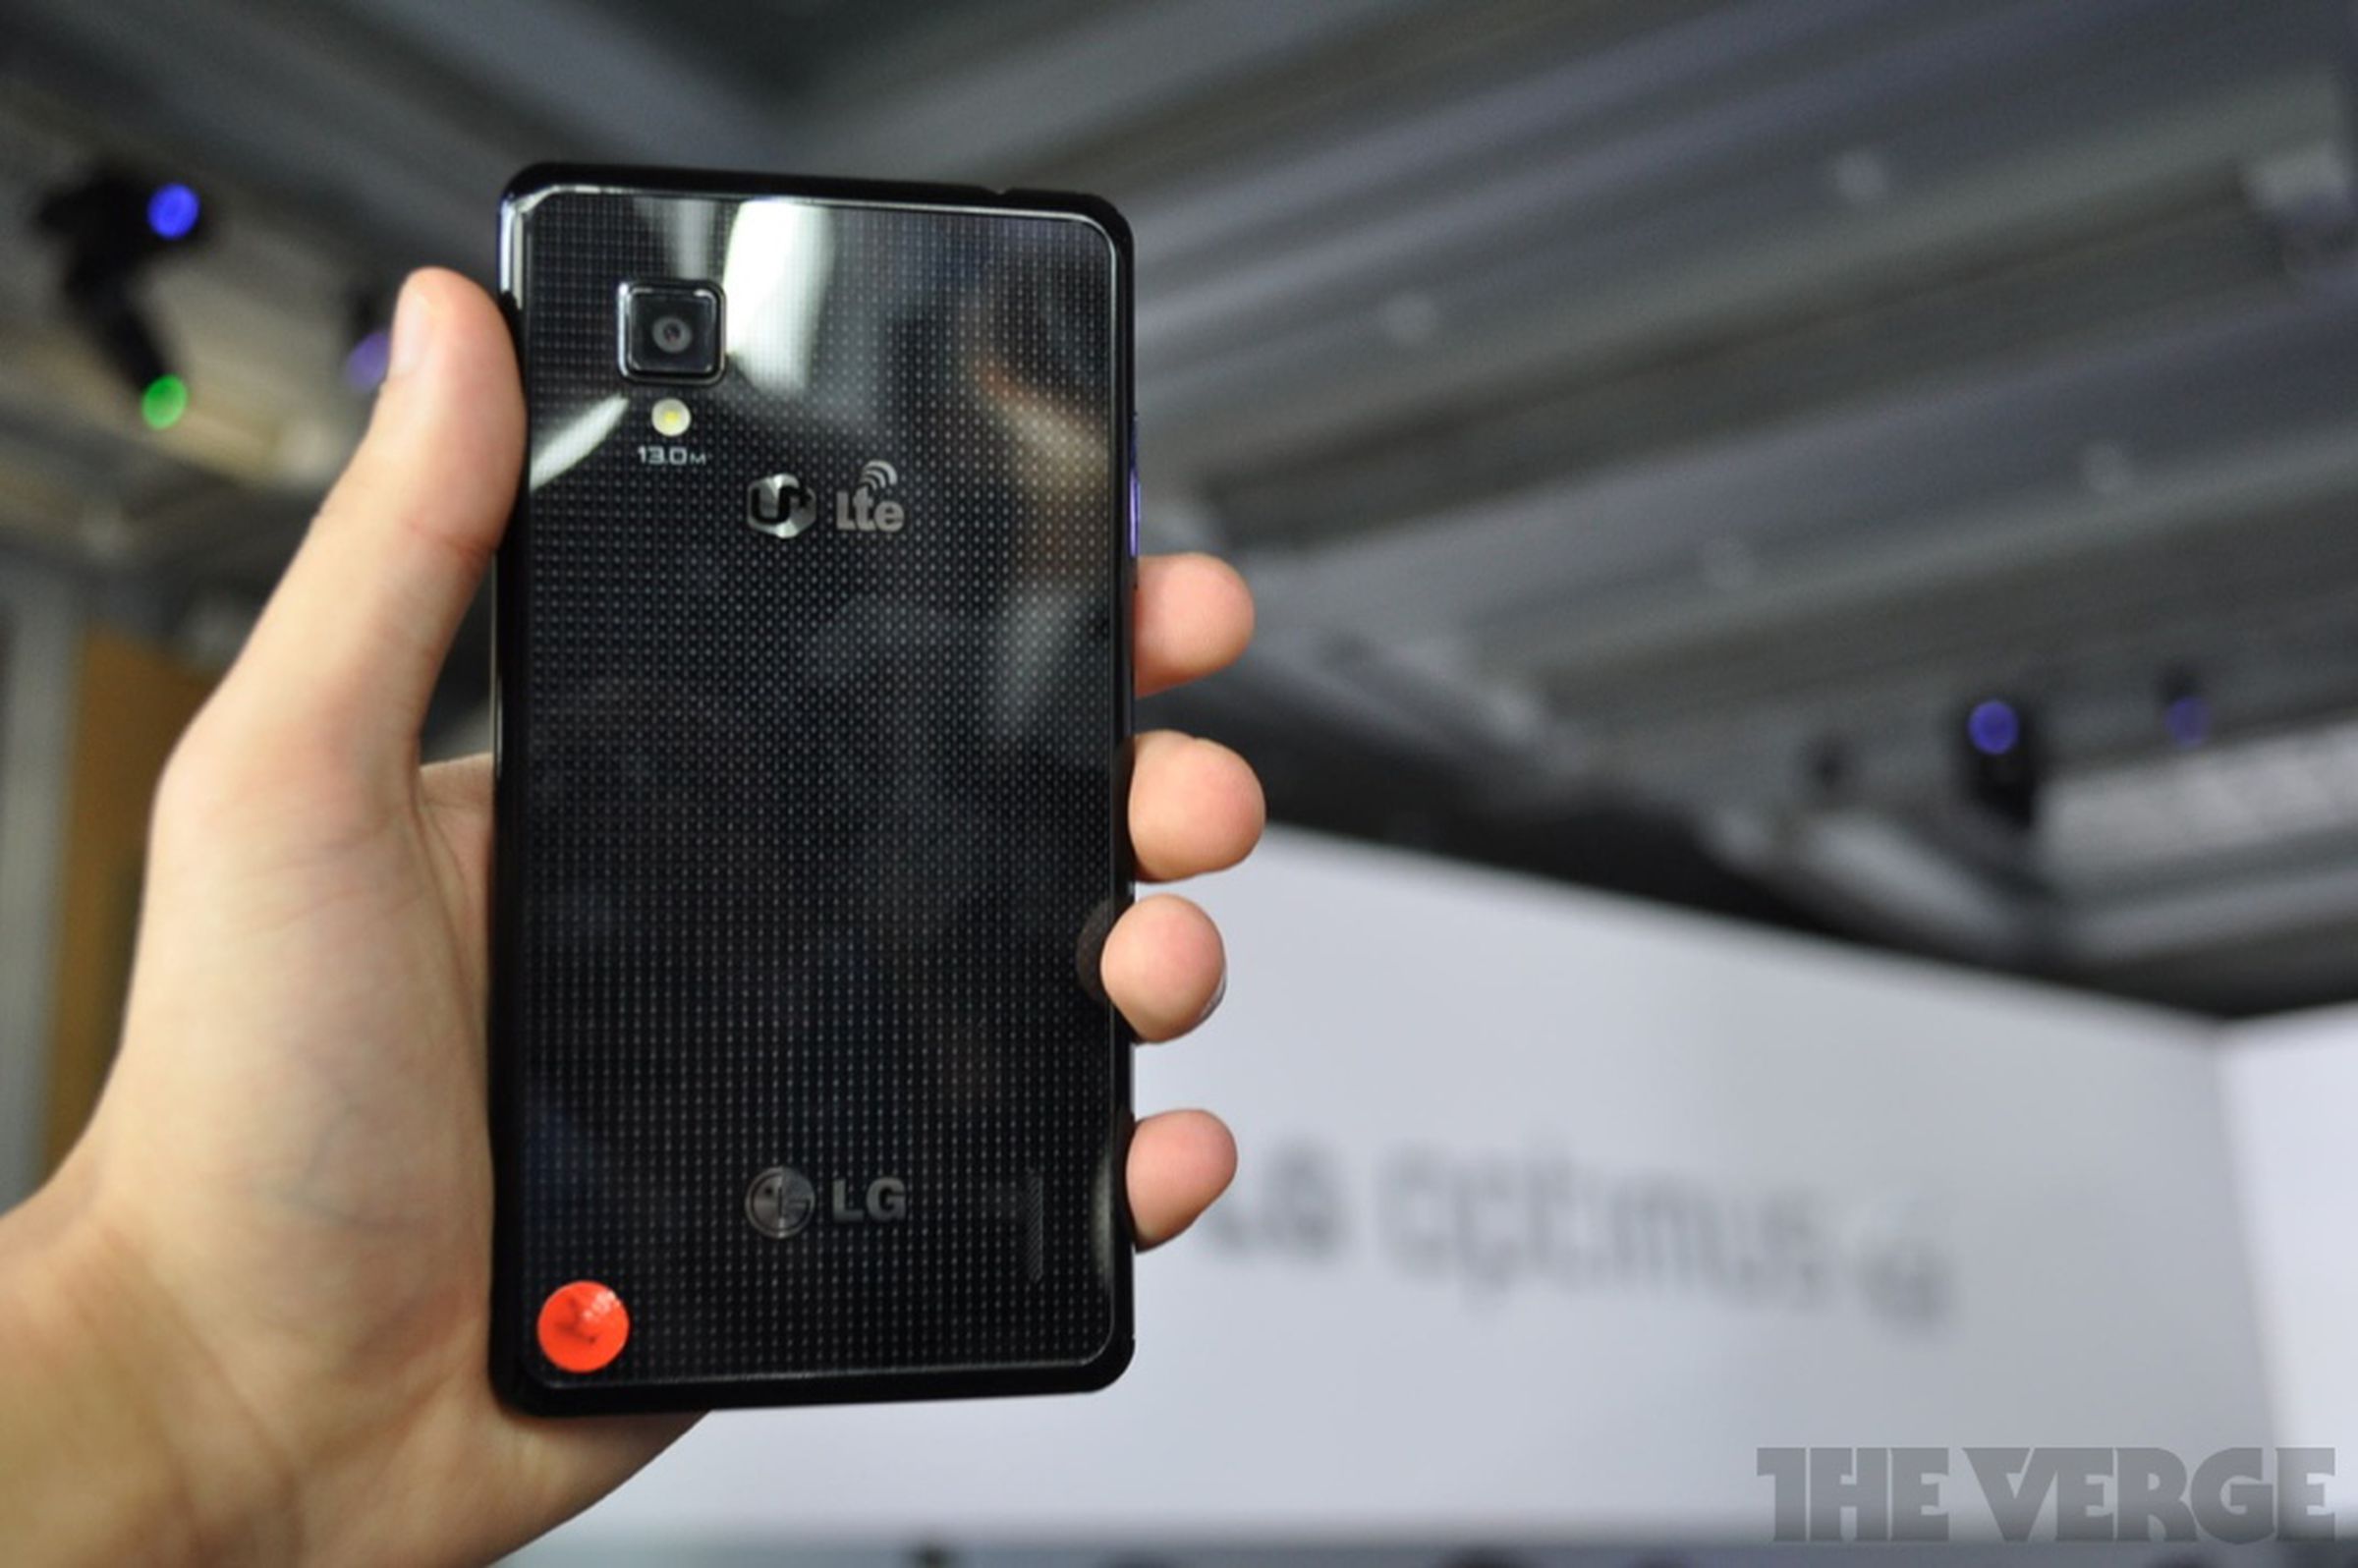 LG Optimus G hands-on images from Korea